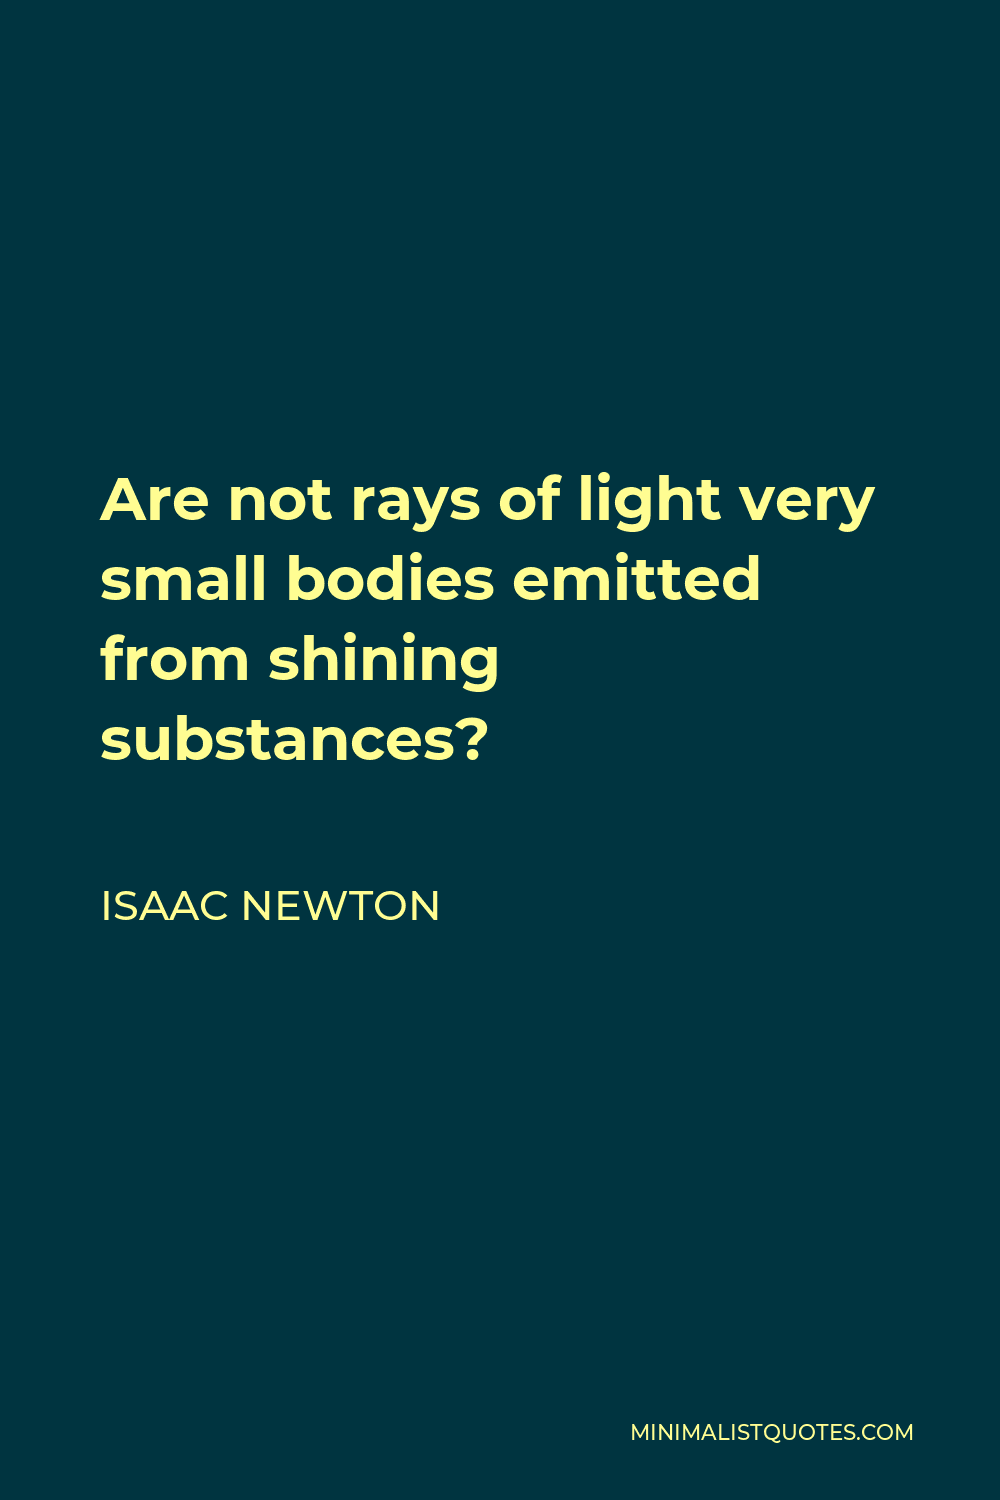 Isaac Newton Quote - Are not rays of light very small bodies emitted from shining substances?